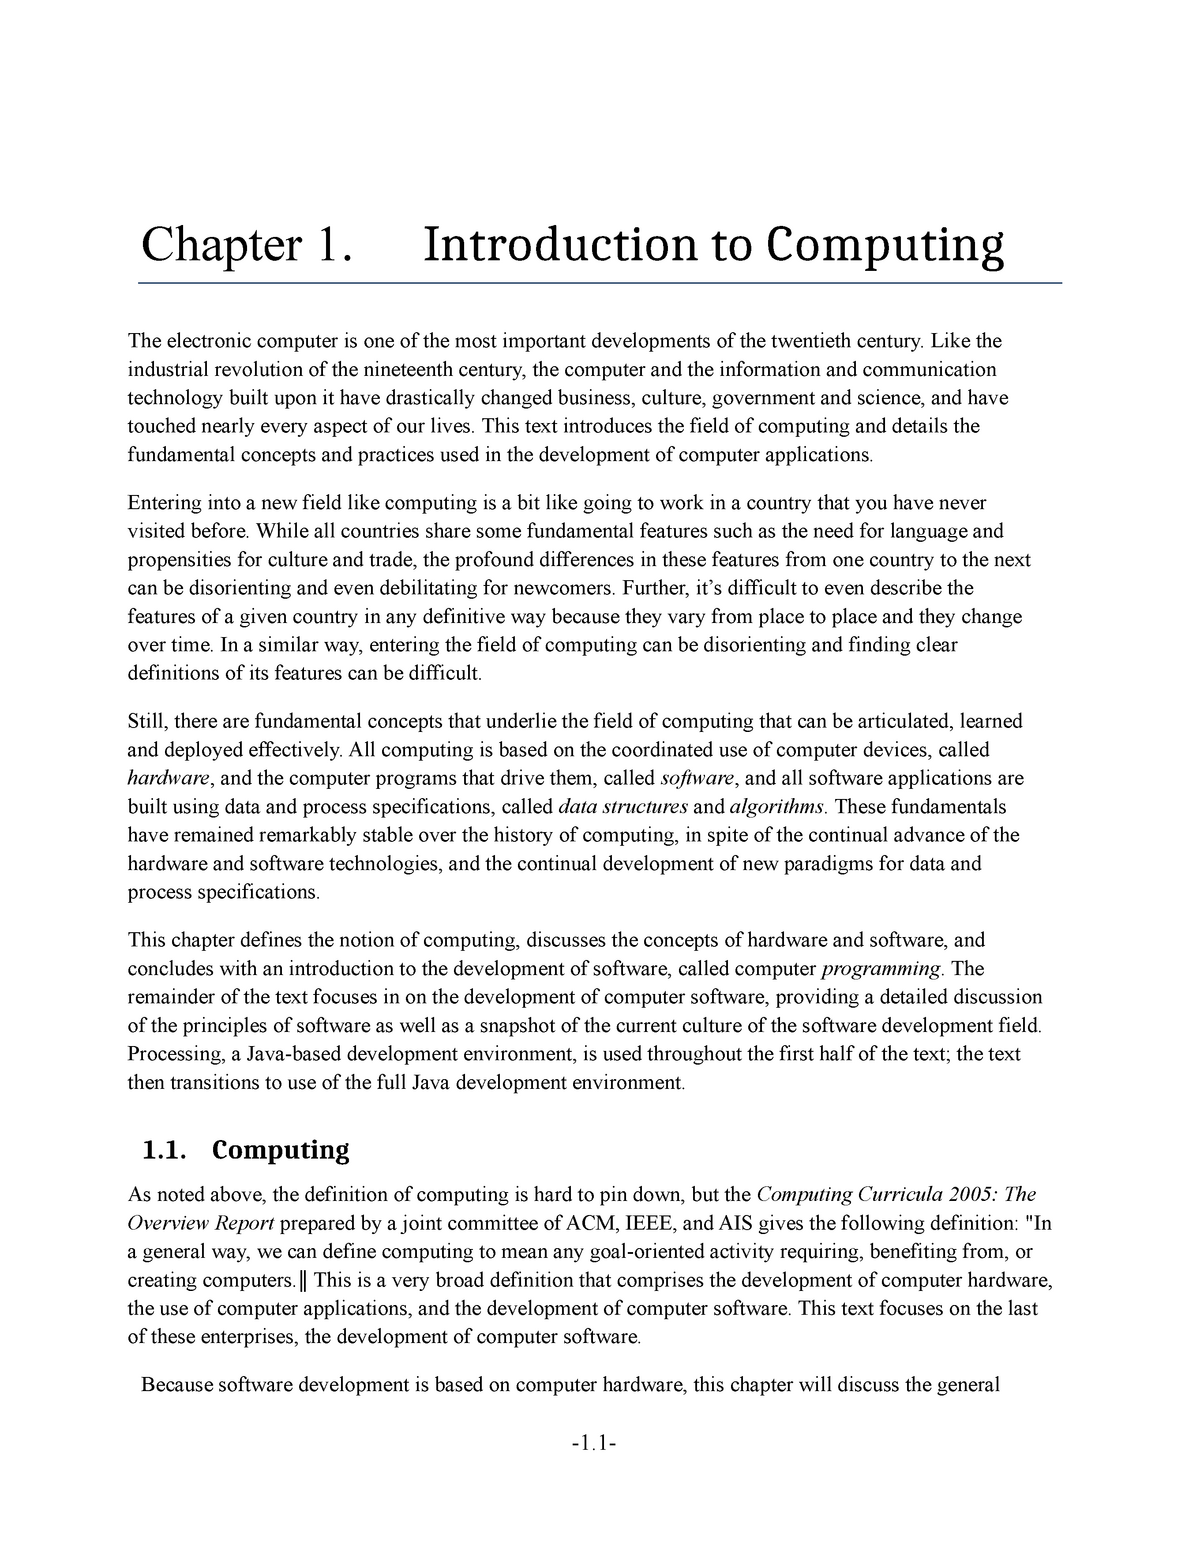 essays in computing science